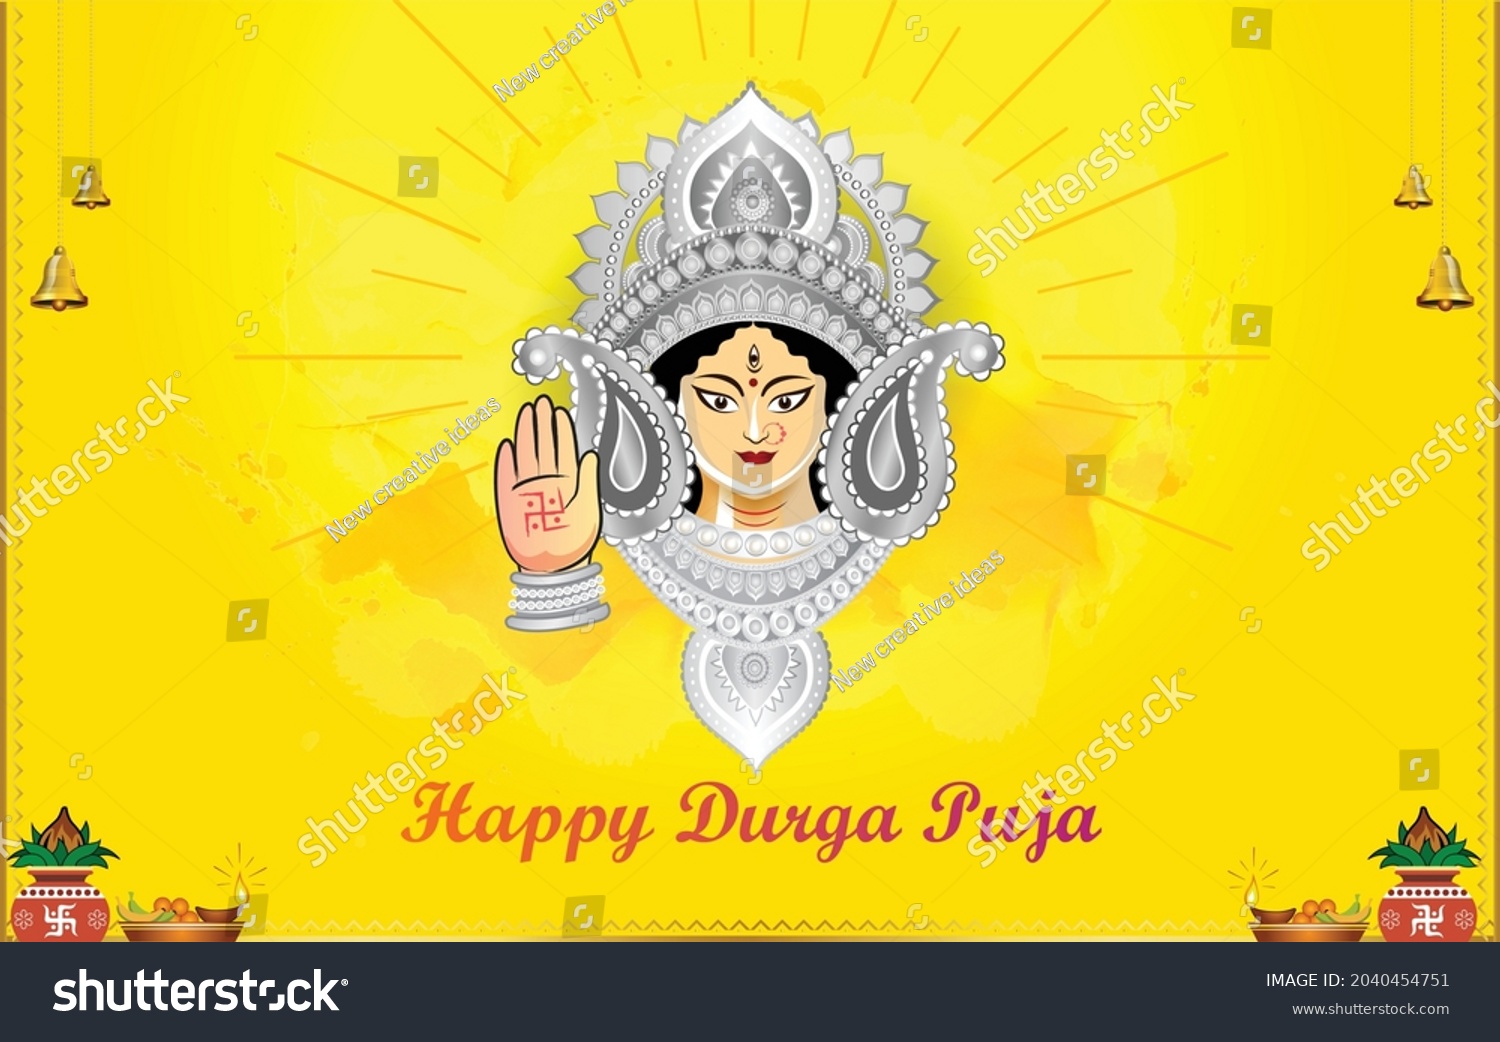 SVG of Durga puja worship festival concept of Indian svg